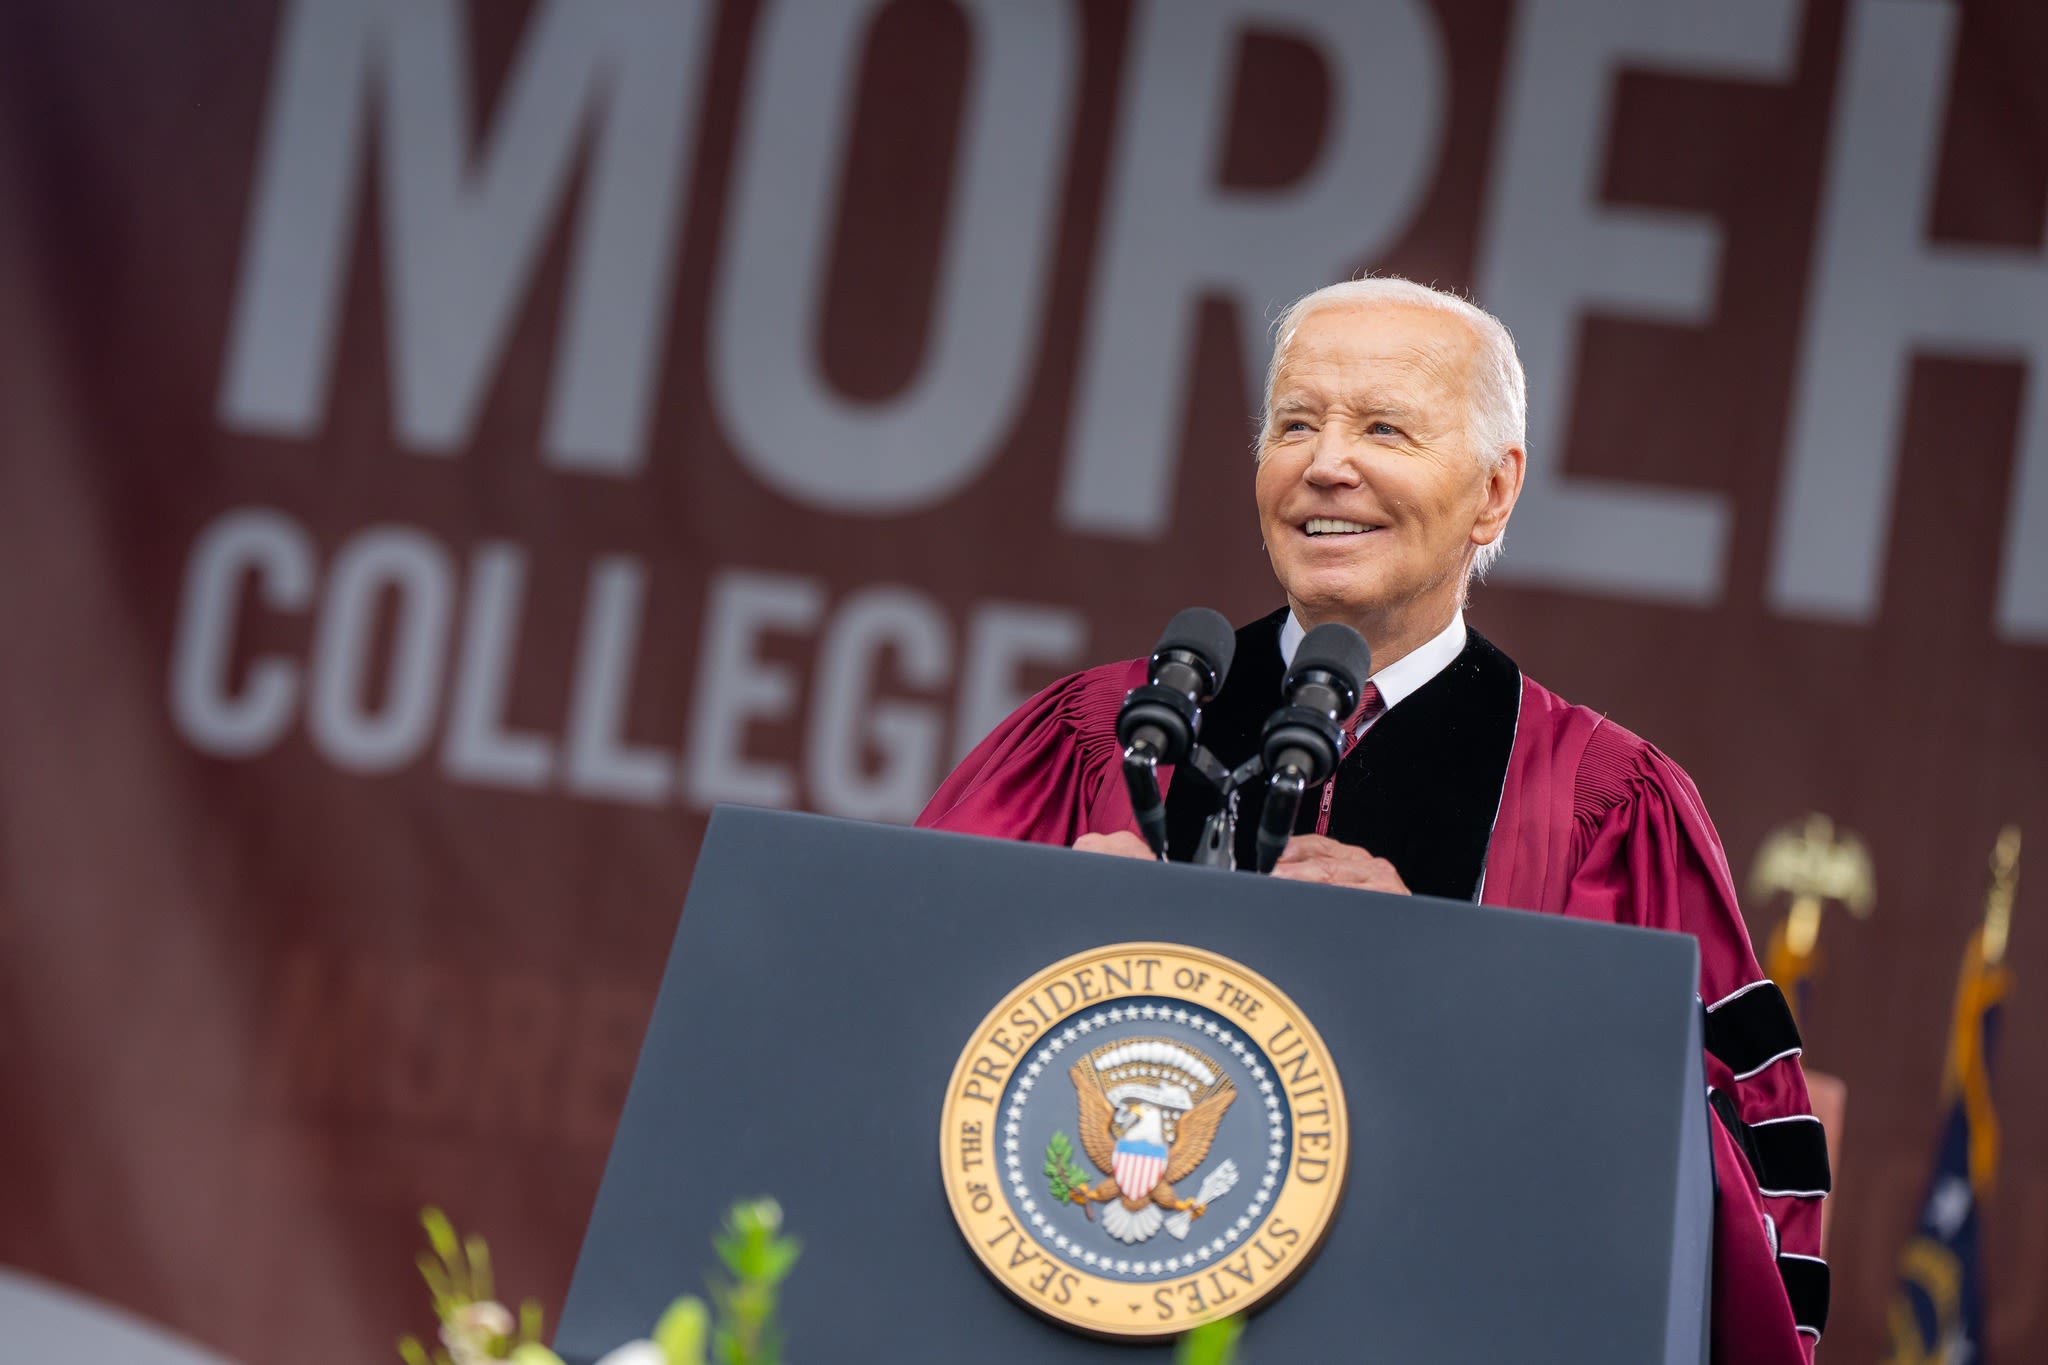 The Spectacle Ep. 110: Joe Biden Is Racist. His Commencement Speech at Morehouse Proved It. - The American Spectator...